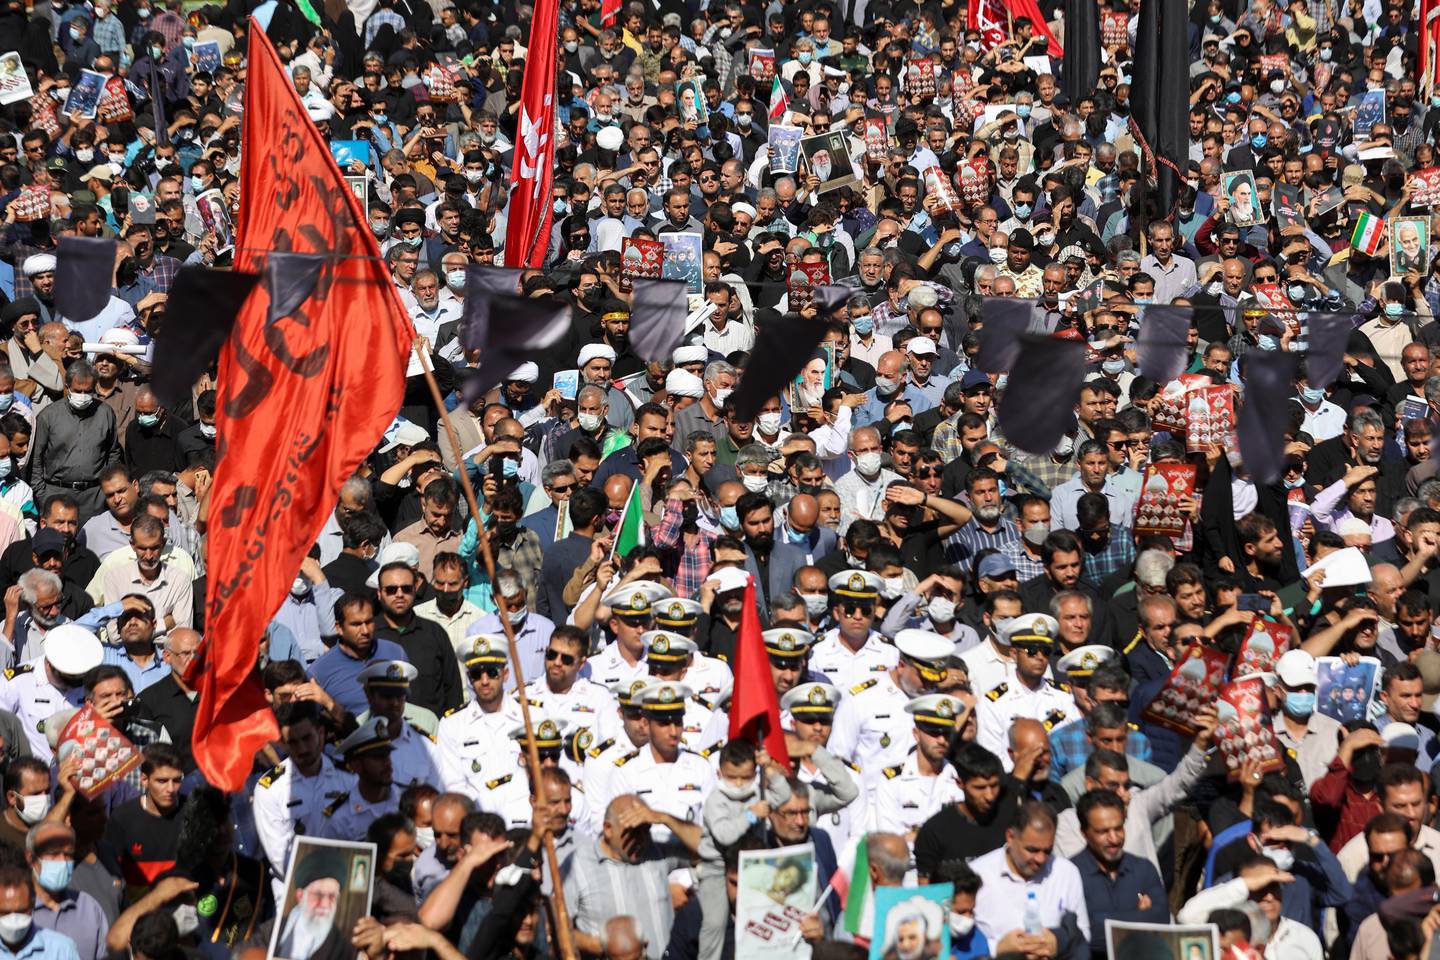 Iranians gather around during a funeral ceremony of the people killed in the Shah Cheragh Shrine attack. WANA via Reuters